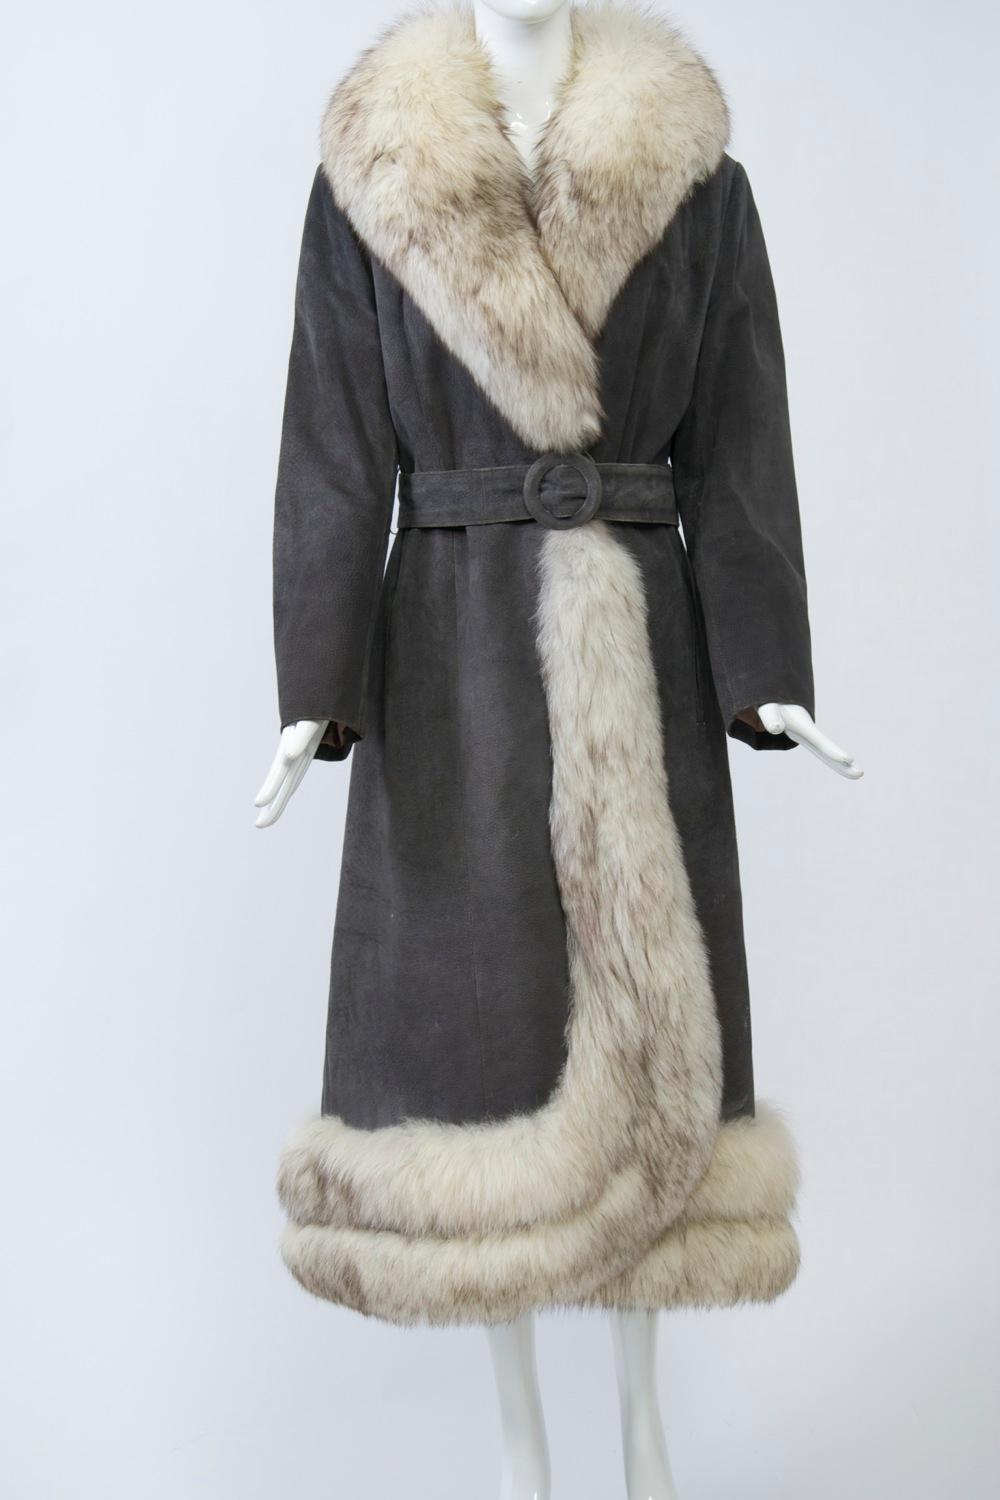 1970s coat crafted of gray pigskin suede and featuring white fox trim for the lush shawl collar and front trim that contours around the hem. A self belt with buckle encircles the waistband that closes with a button and loop; interior button to hold